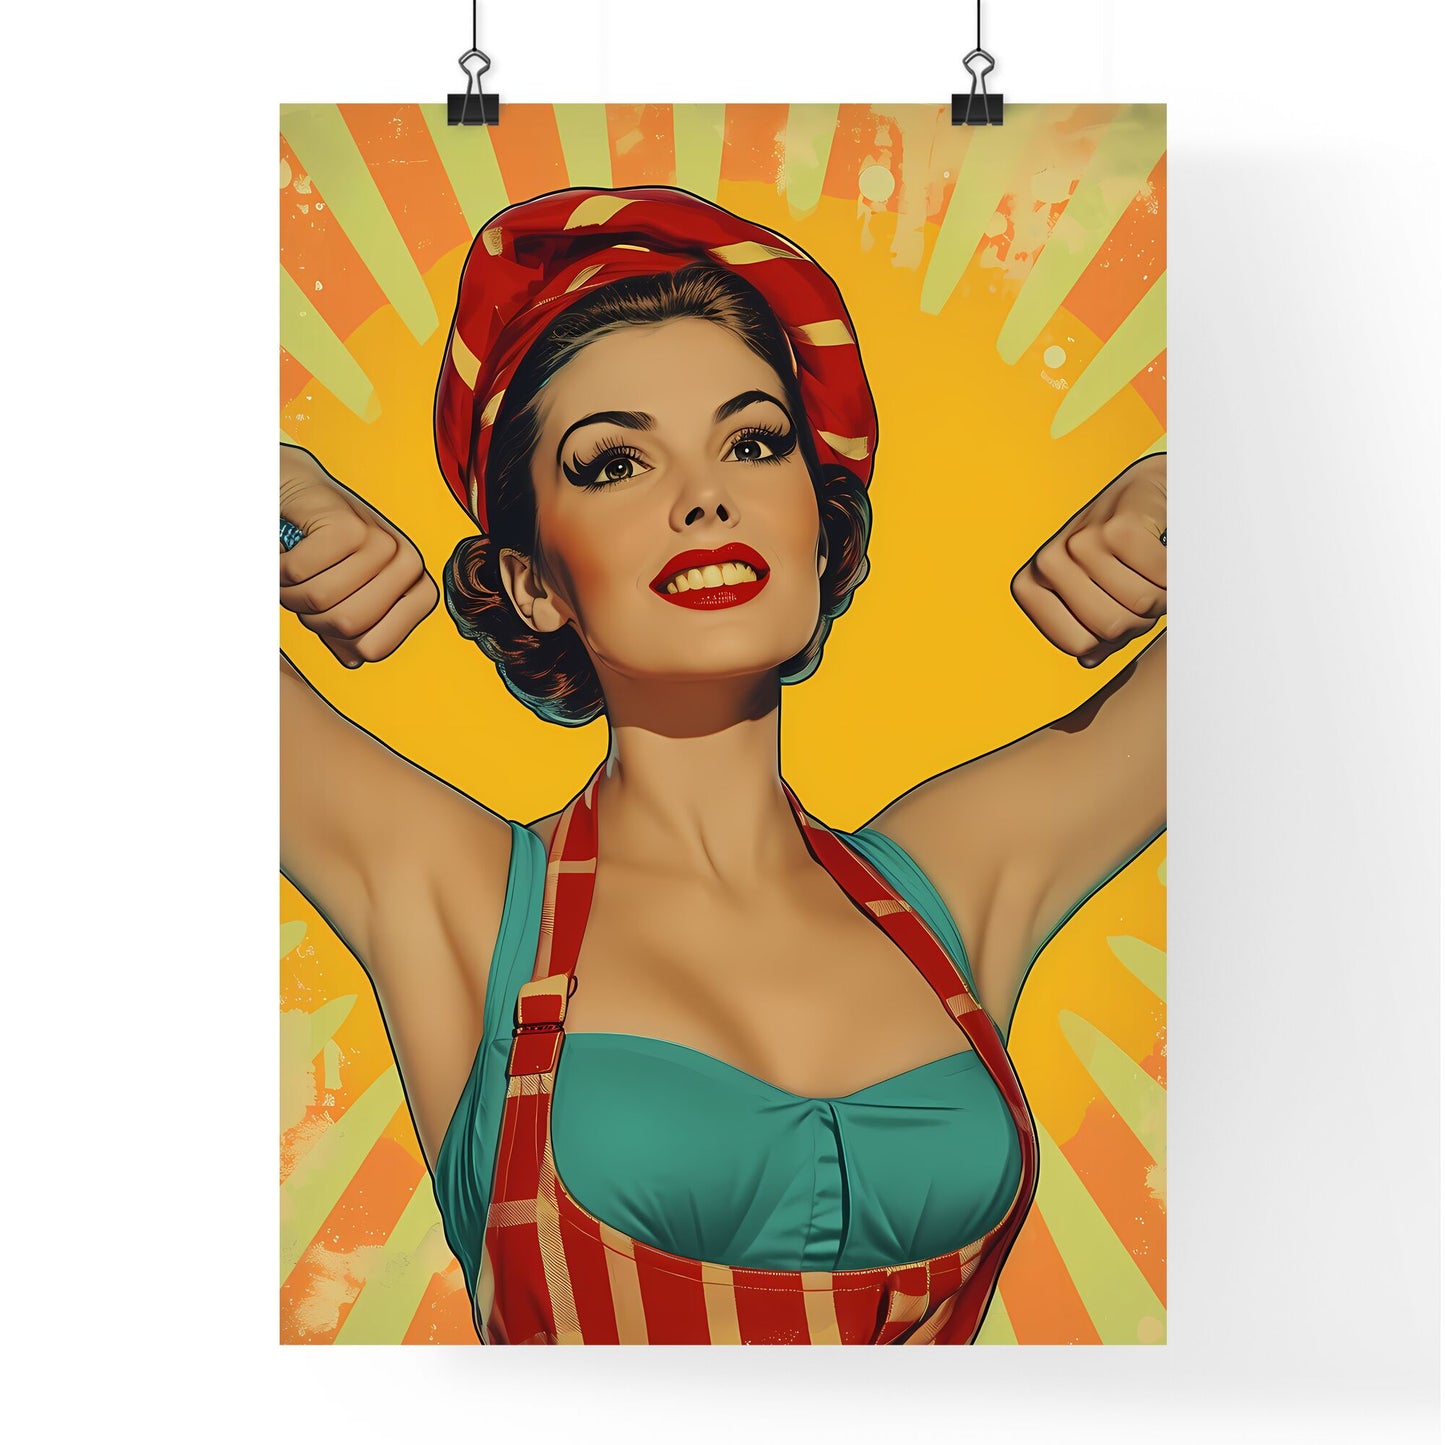 A super morbidly obese immobile woman chef - Art print of a woman with red hat and suspenders Default Title